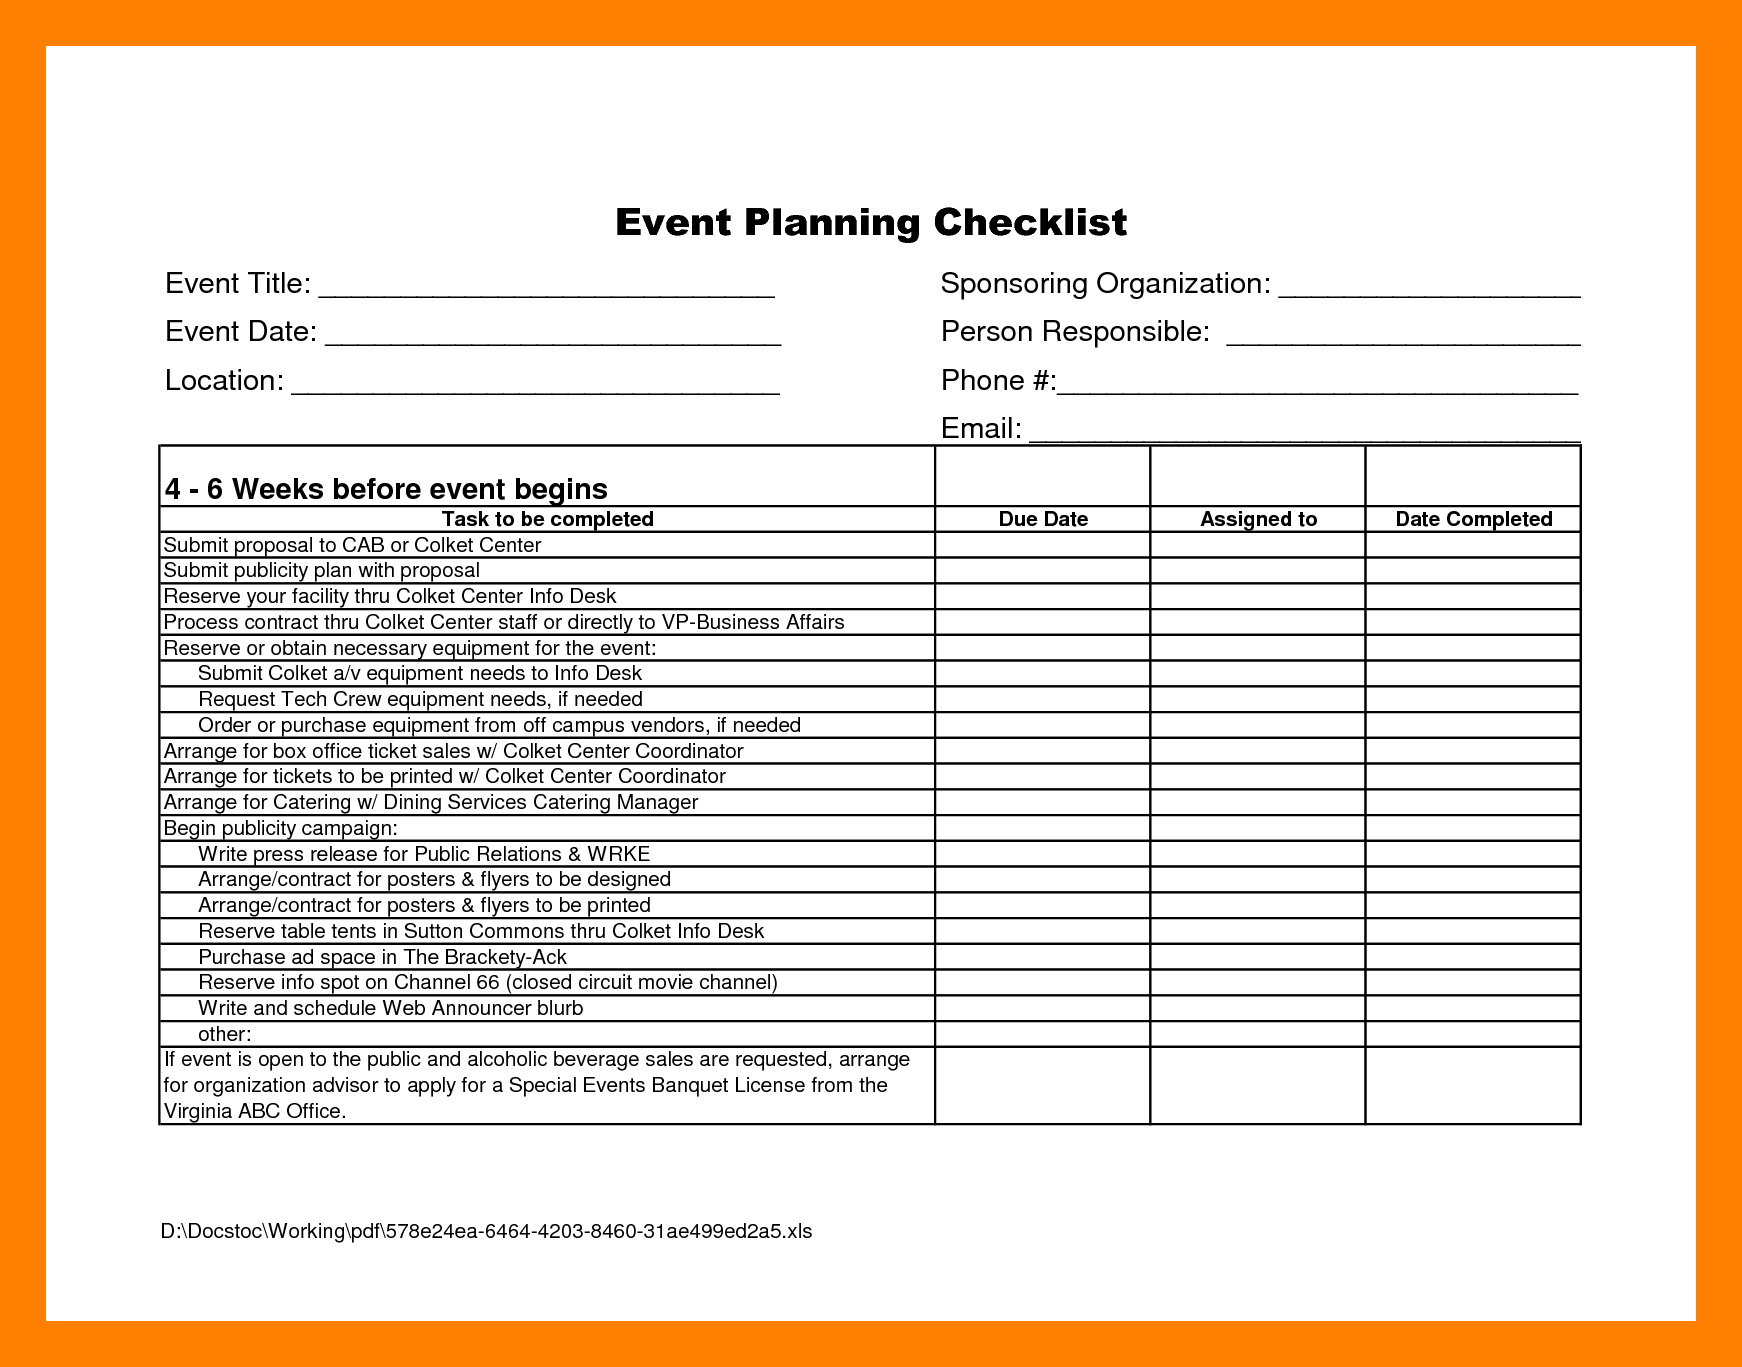 Corporate Event Planning Checklist Template | Calendar For